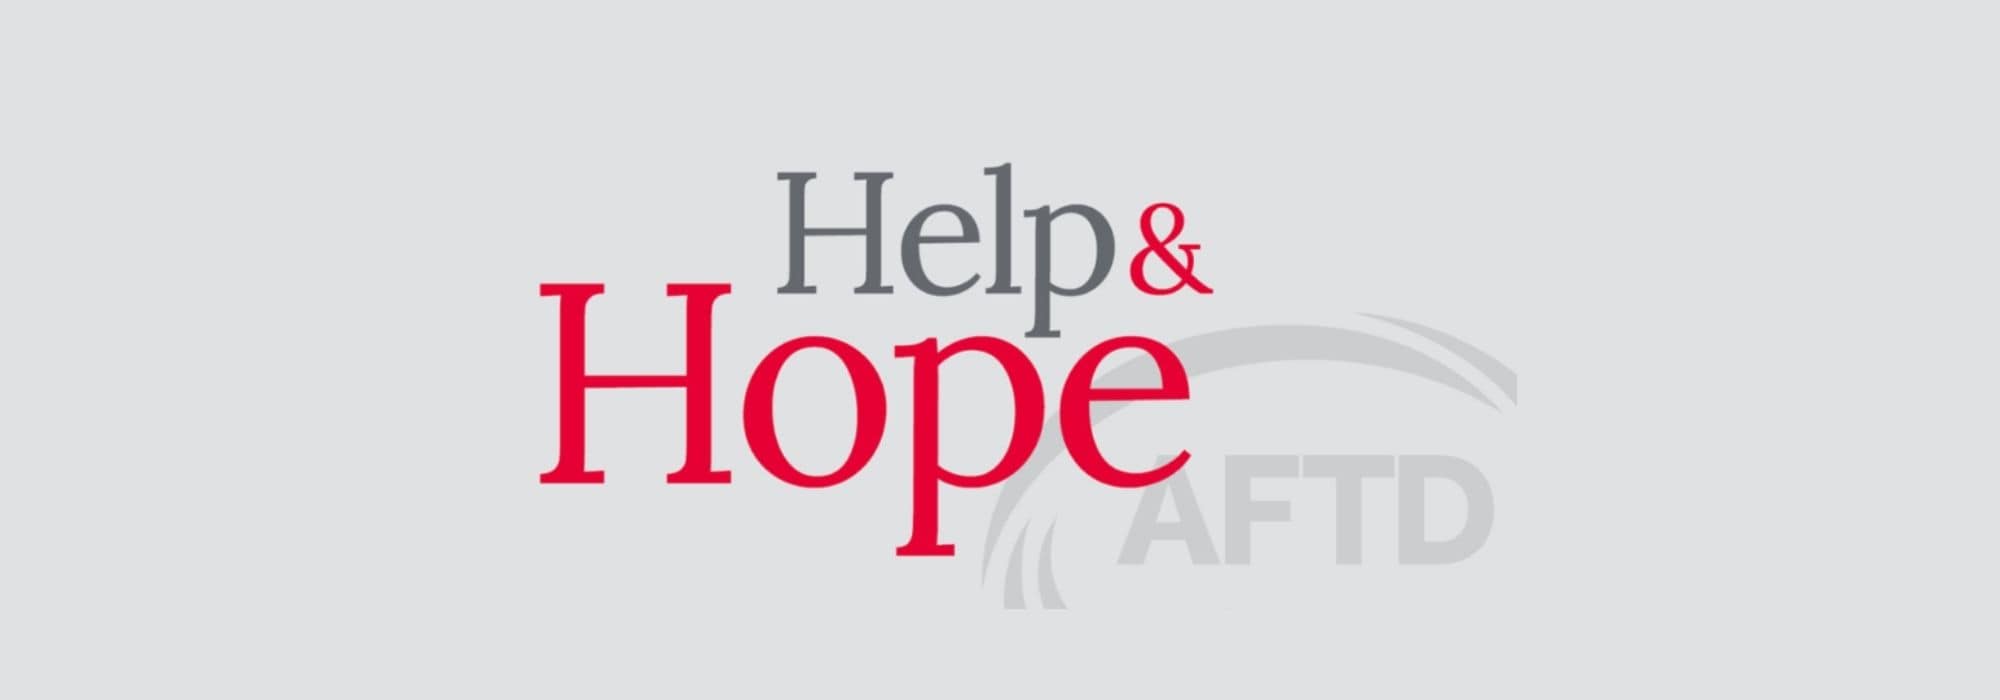 help and hope banner